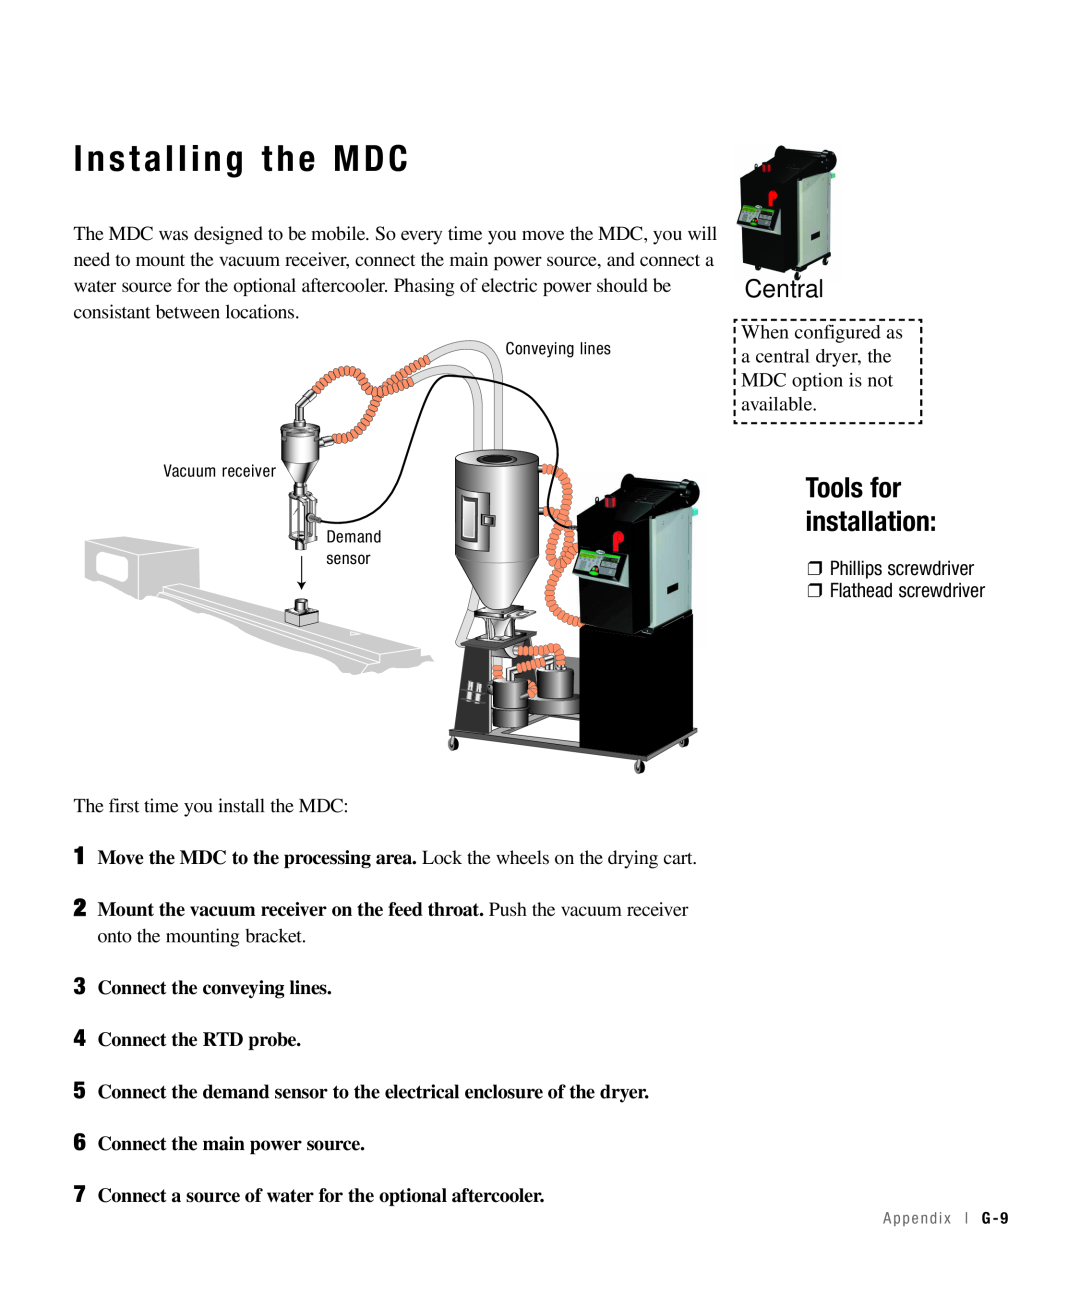 Conair 100, 25, 15, 50 specifications Installing the MDC, Central, Tools for installation 